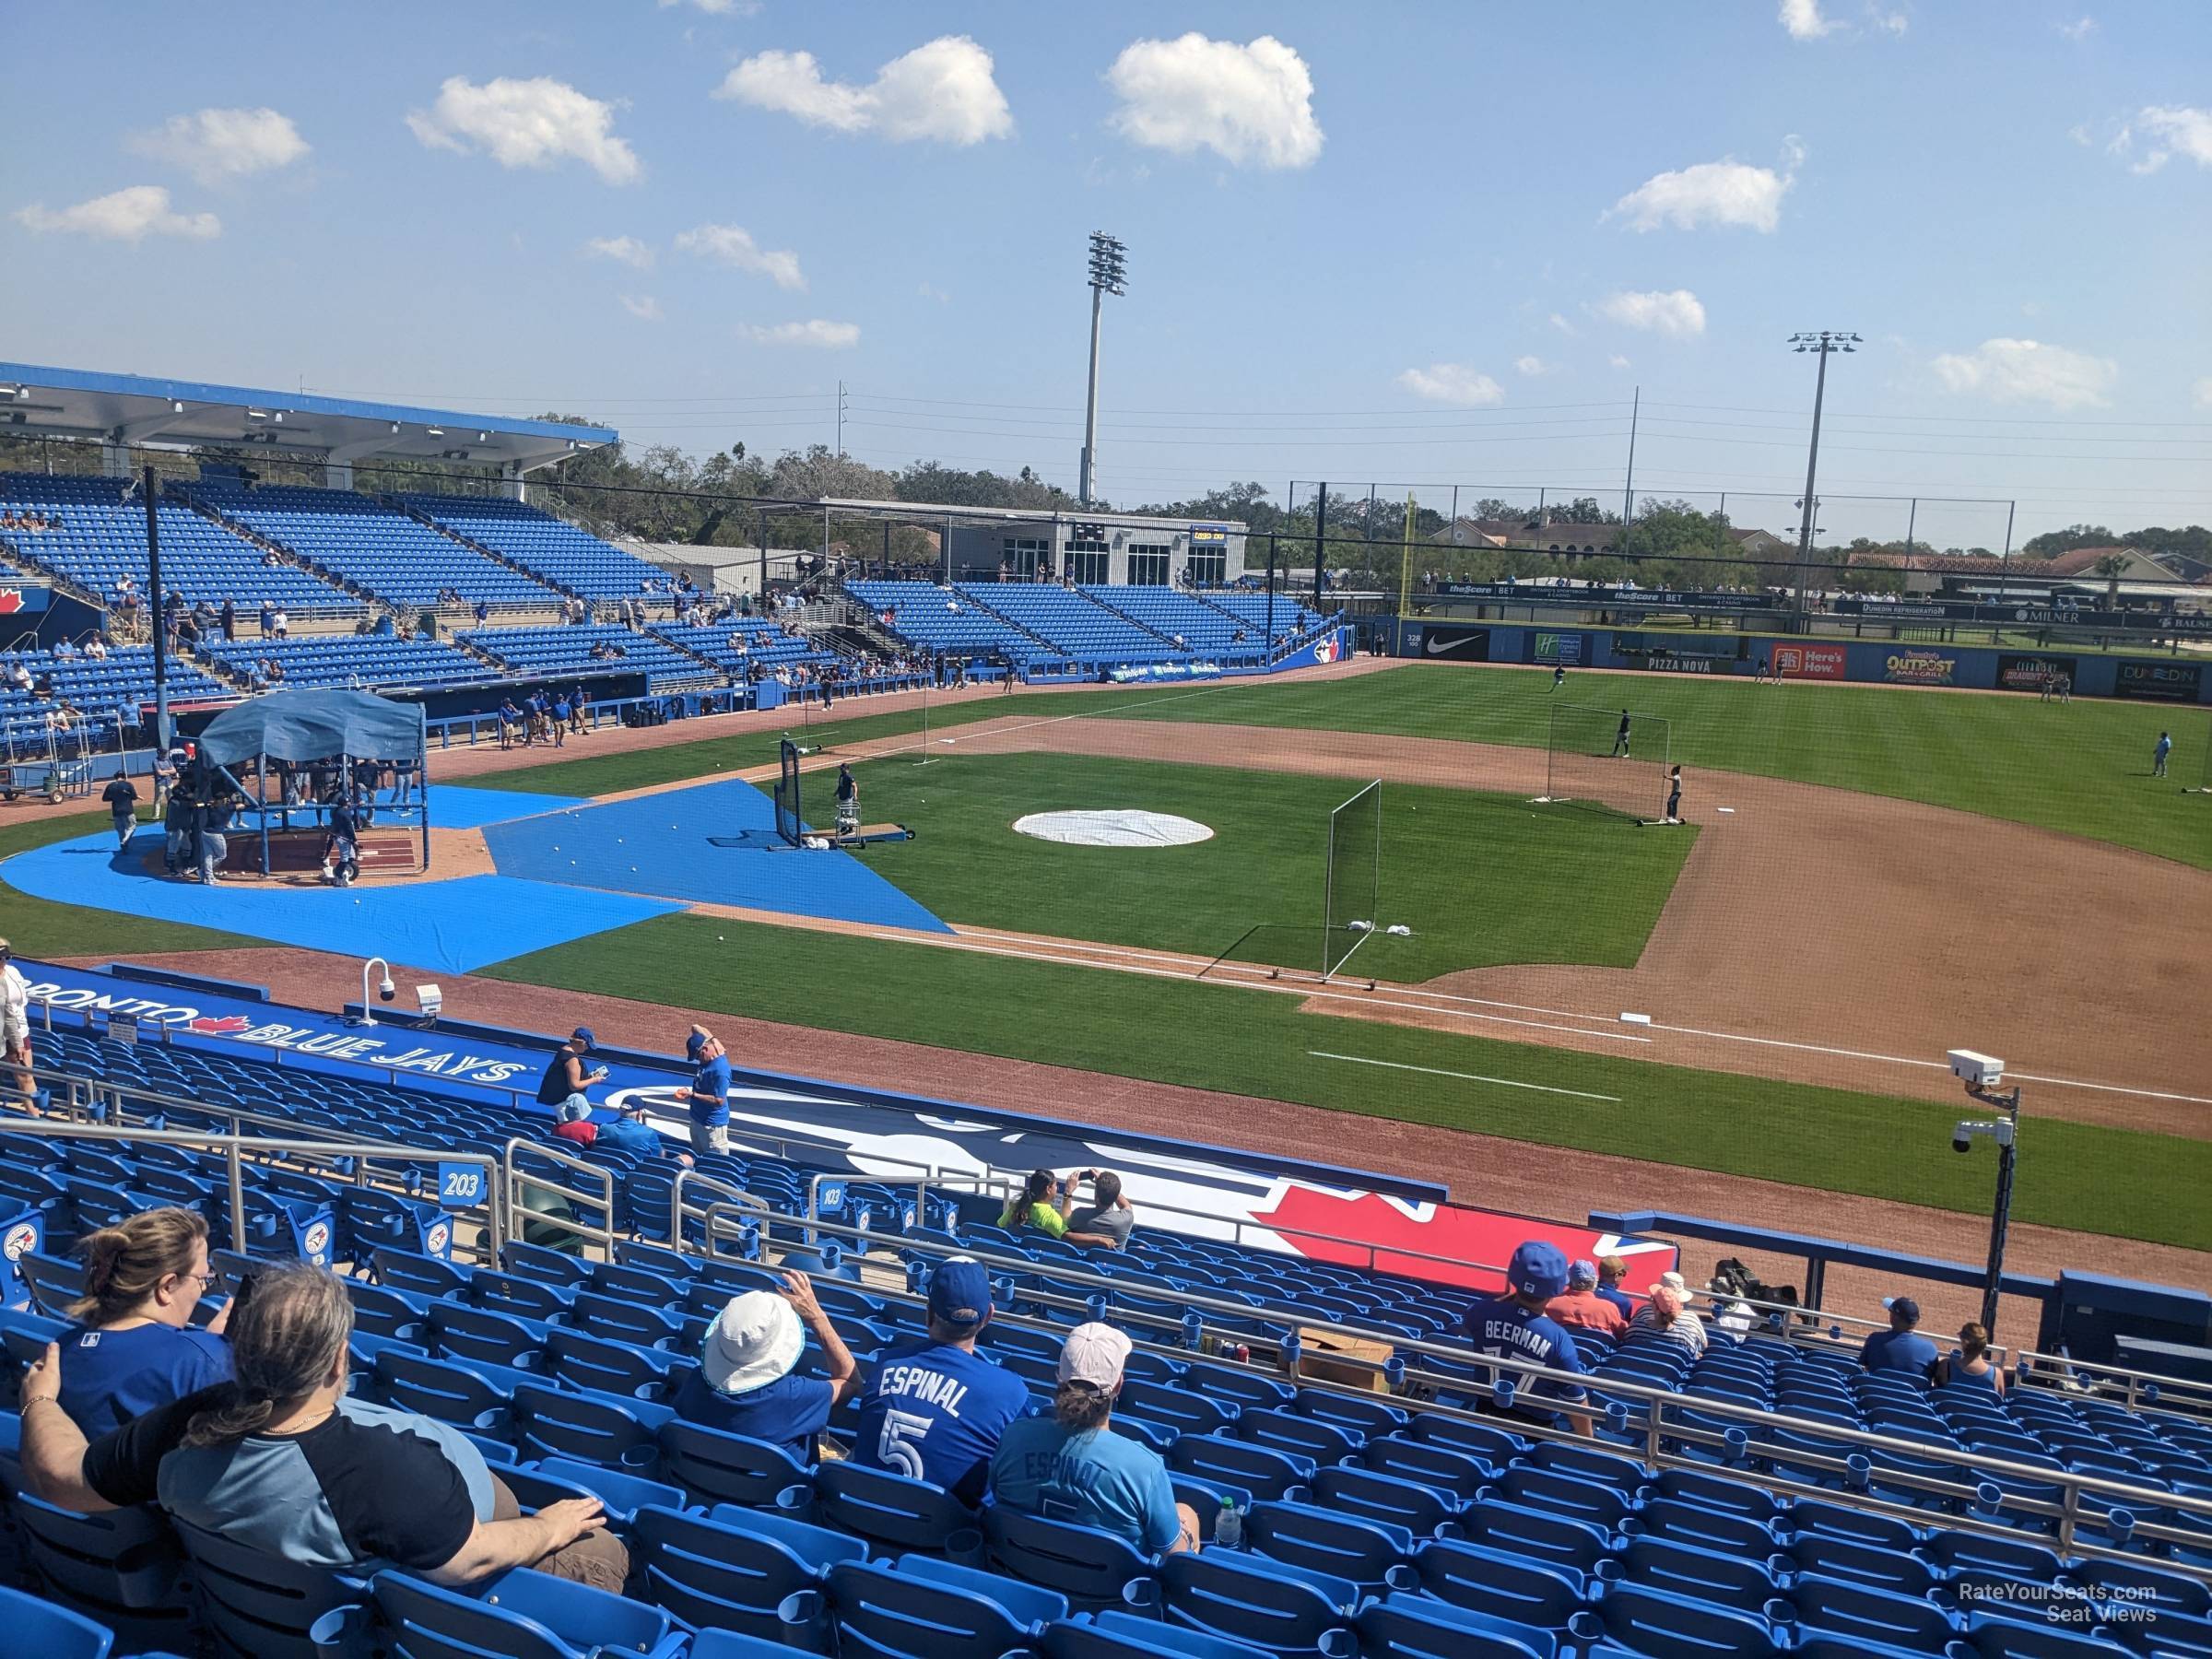 section 203, row 10 seat view  - td ballpark